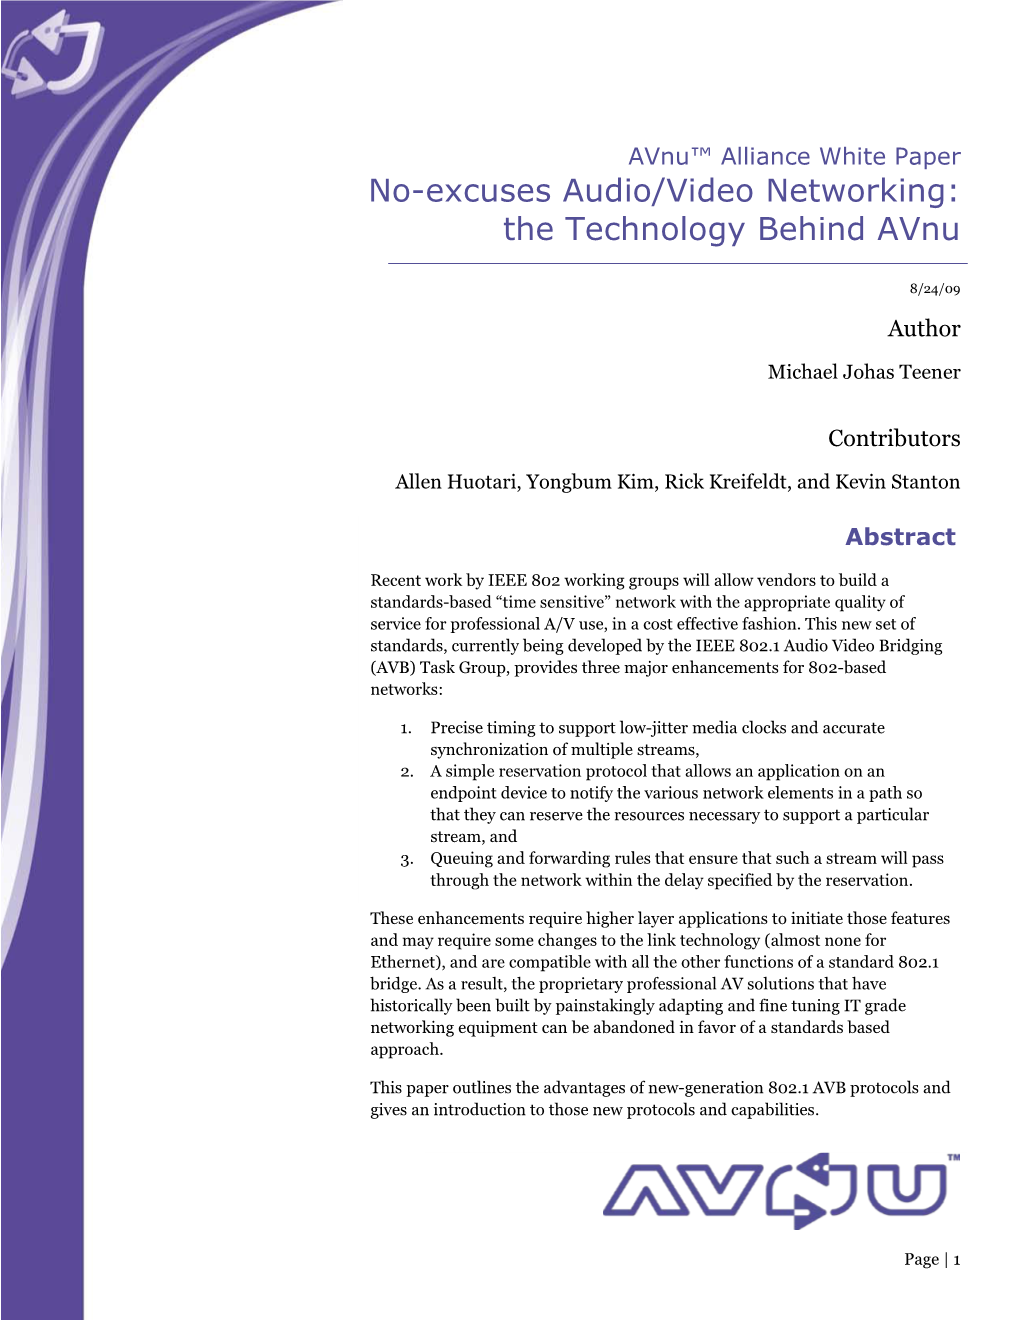 No-Excuses Audio/Video Networking: the Technology Behind Avnu